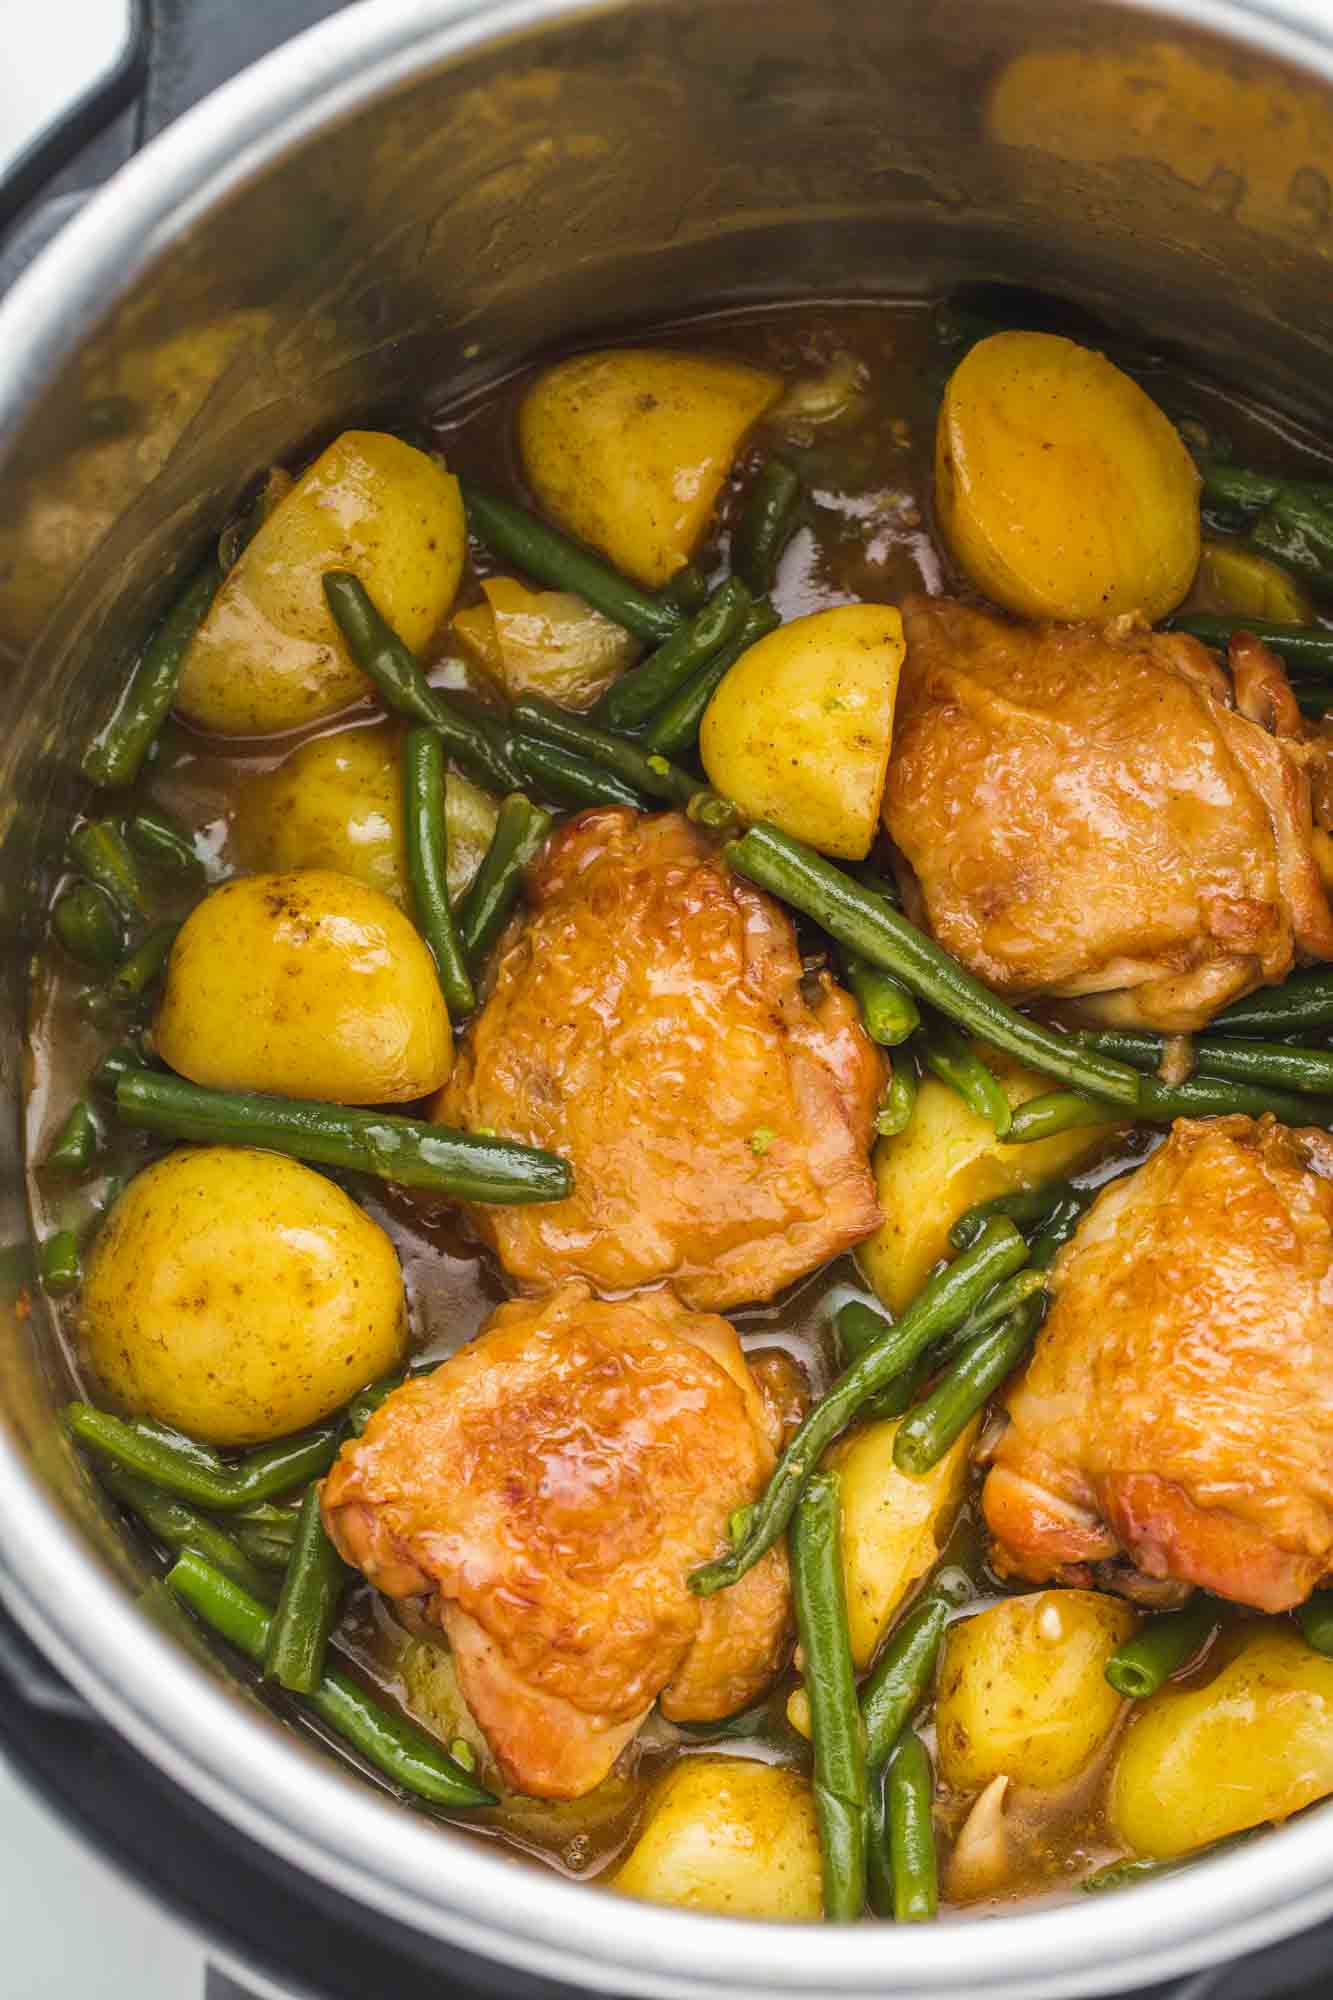 Honey garlic chicken thighs in the instant pot with green beans and baby potatoes